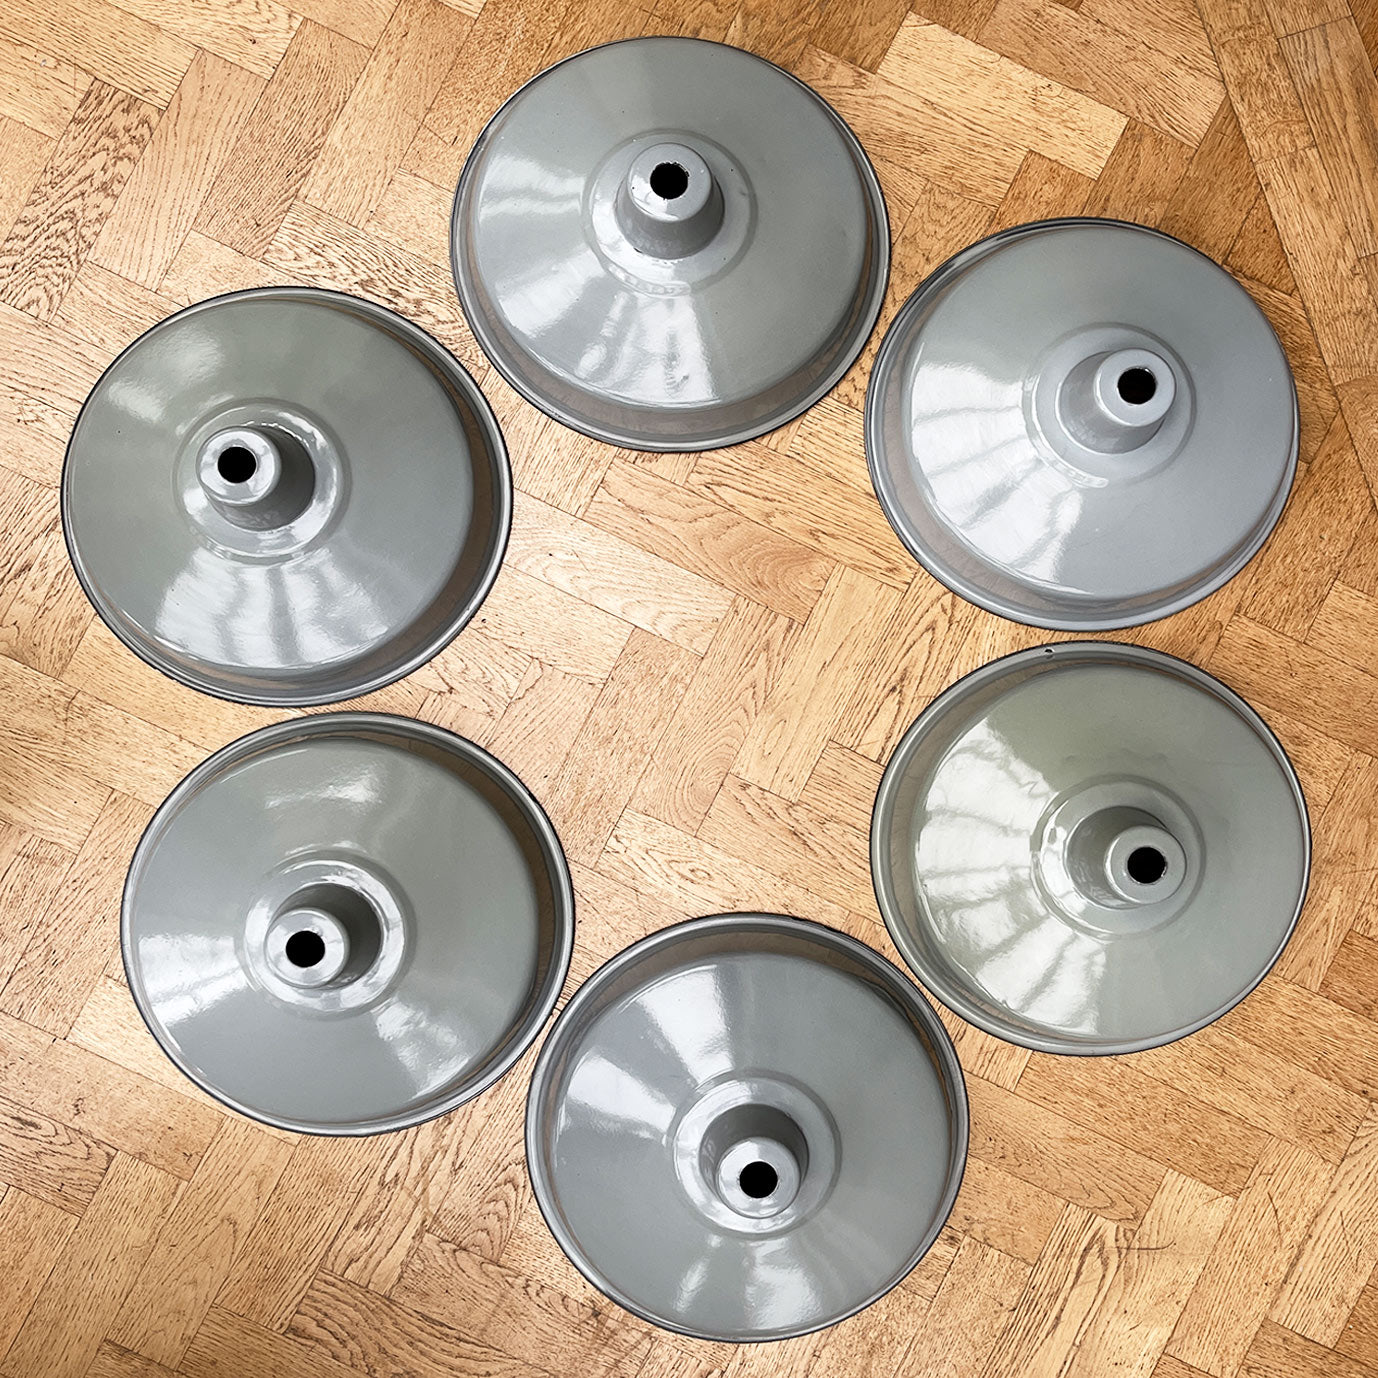 A run of six nice & clean smart grey enamel shades. The inner shade is finished in a white enamel. Great for for the kitchen. We have six of these lights available - SHOP NOW - www.intovintage.co.uk